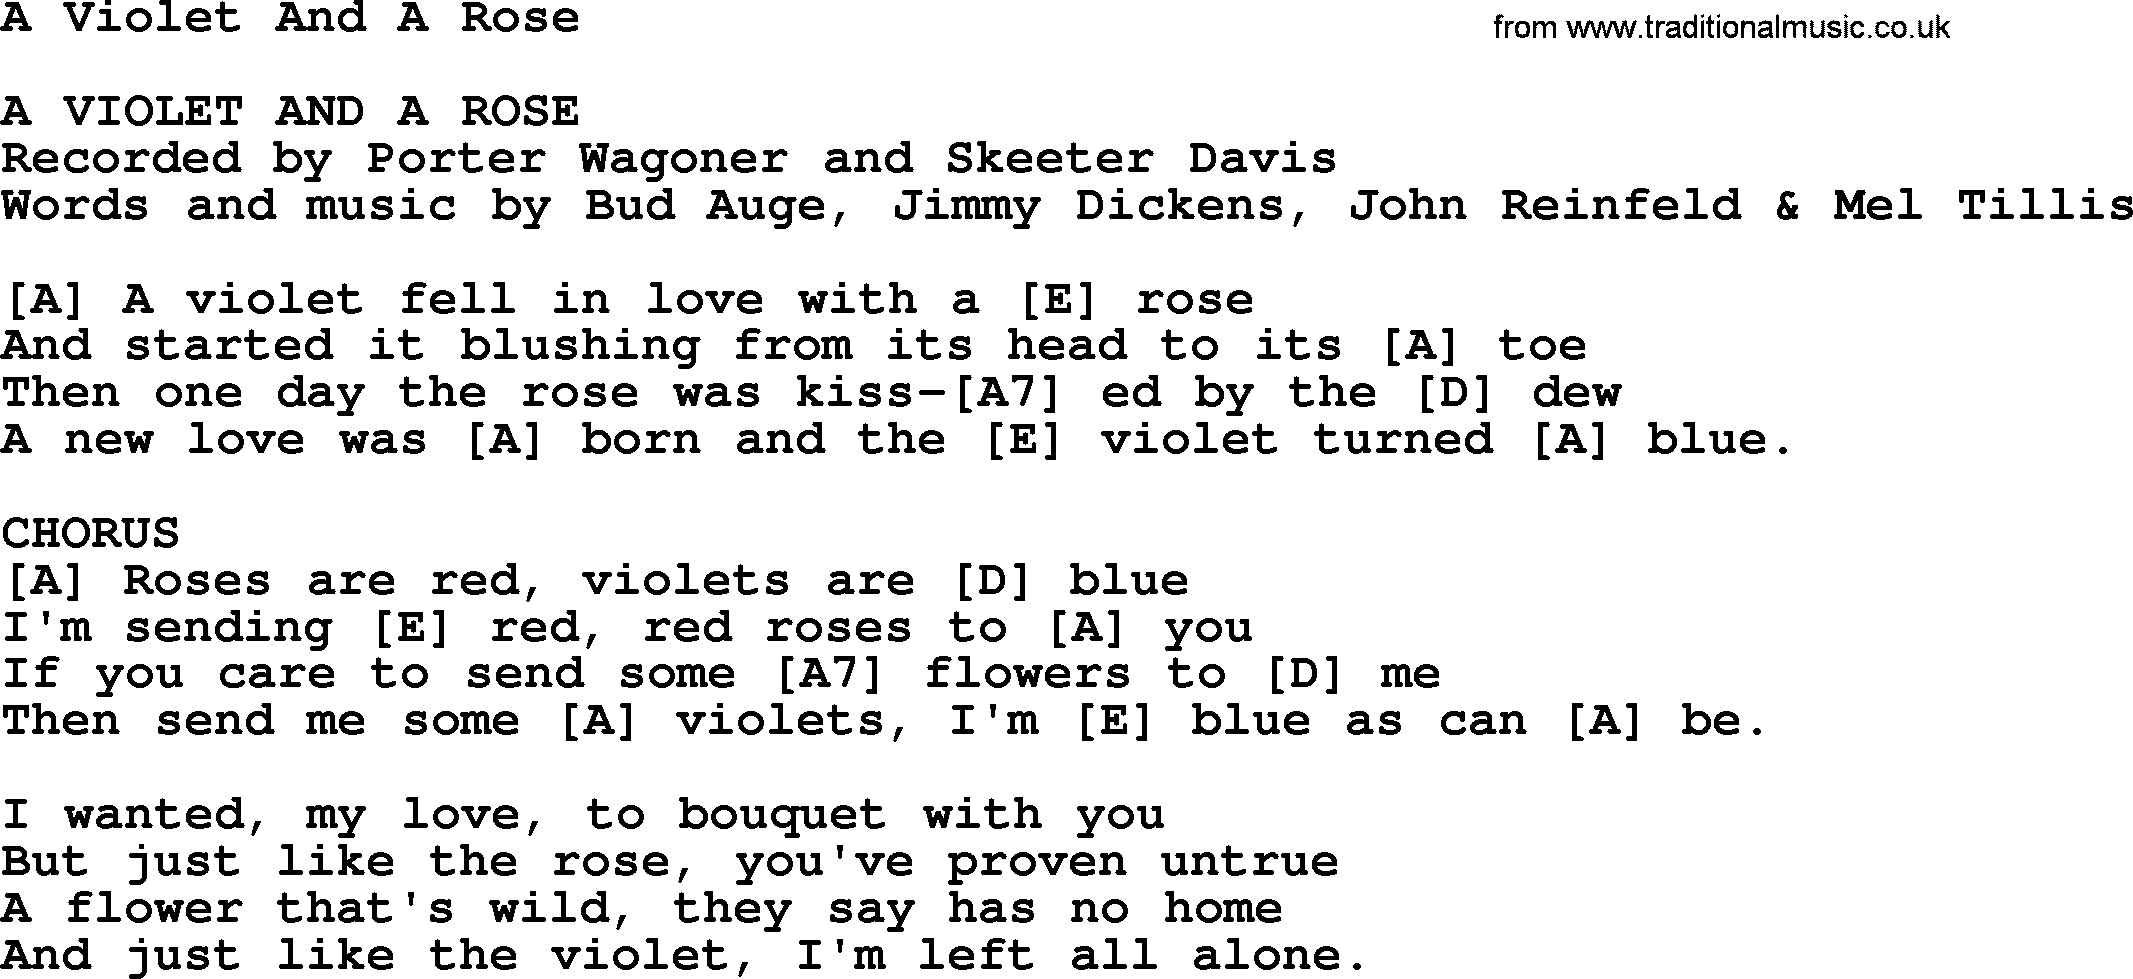 Bluegrass song: A Violet And A Rose, lyrics and chords